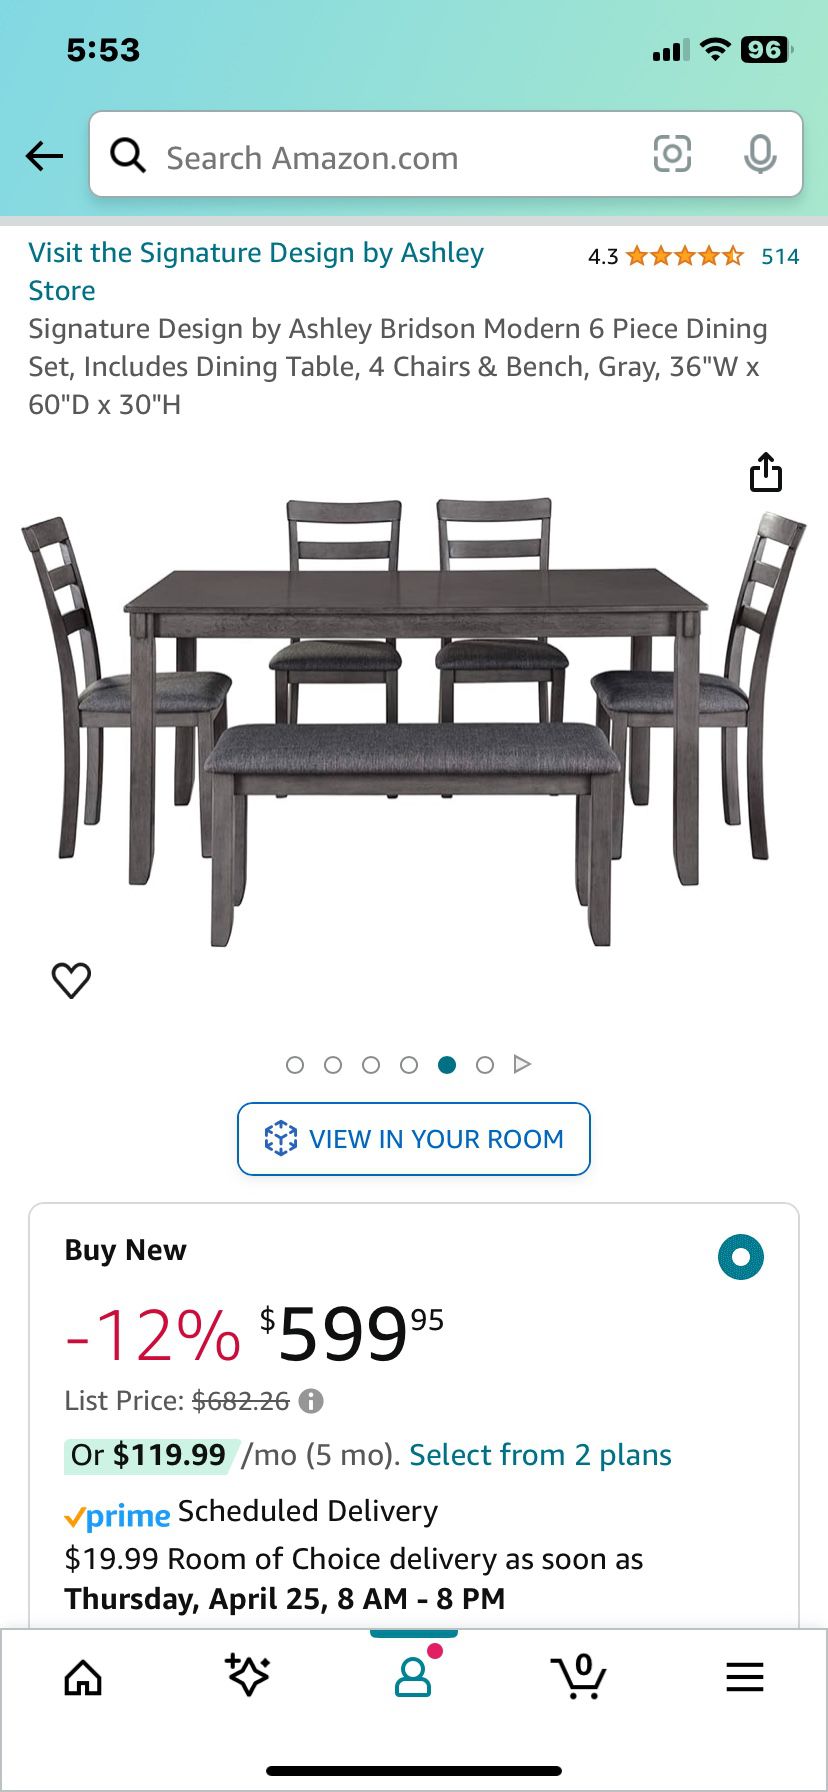 Dining Table, 4 Chairs & Bench